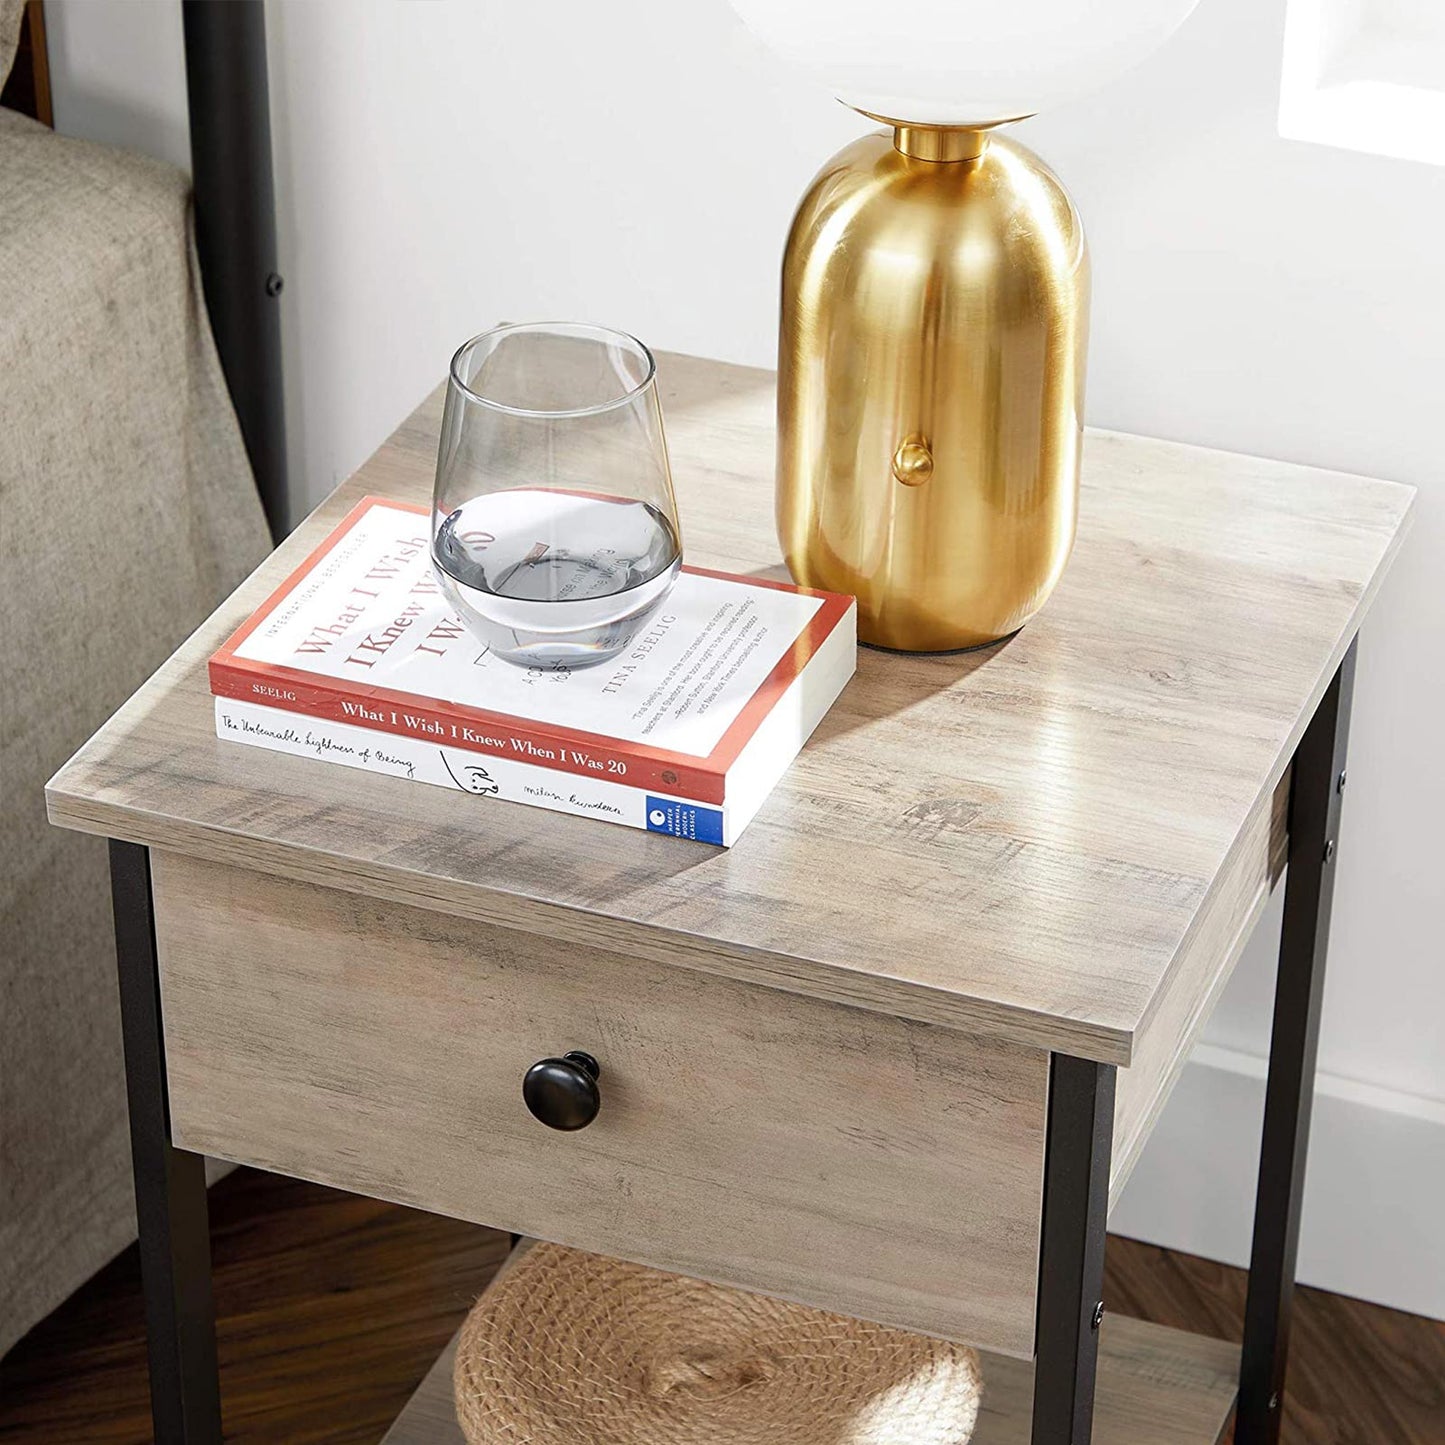 Nightstand with Drawer in Gray